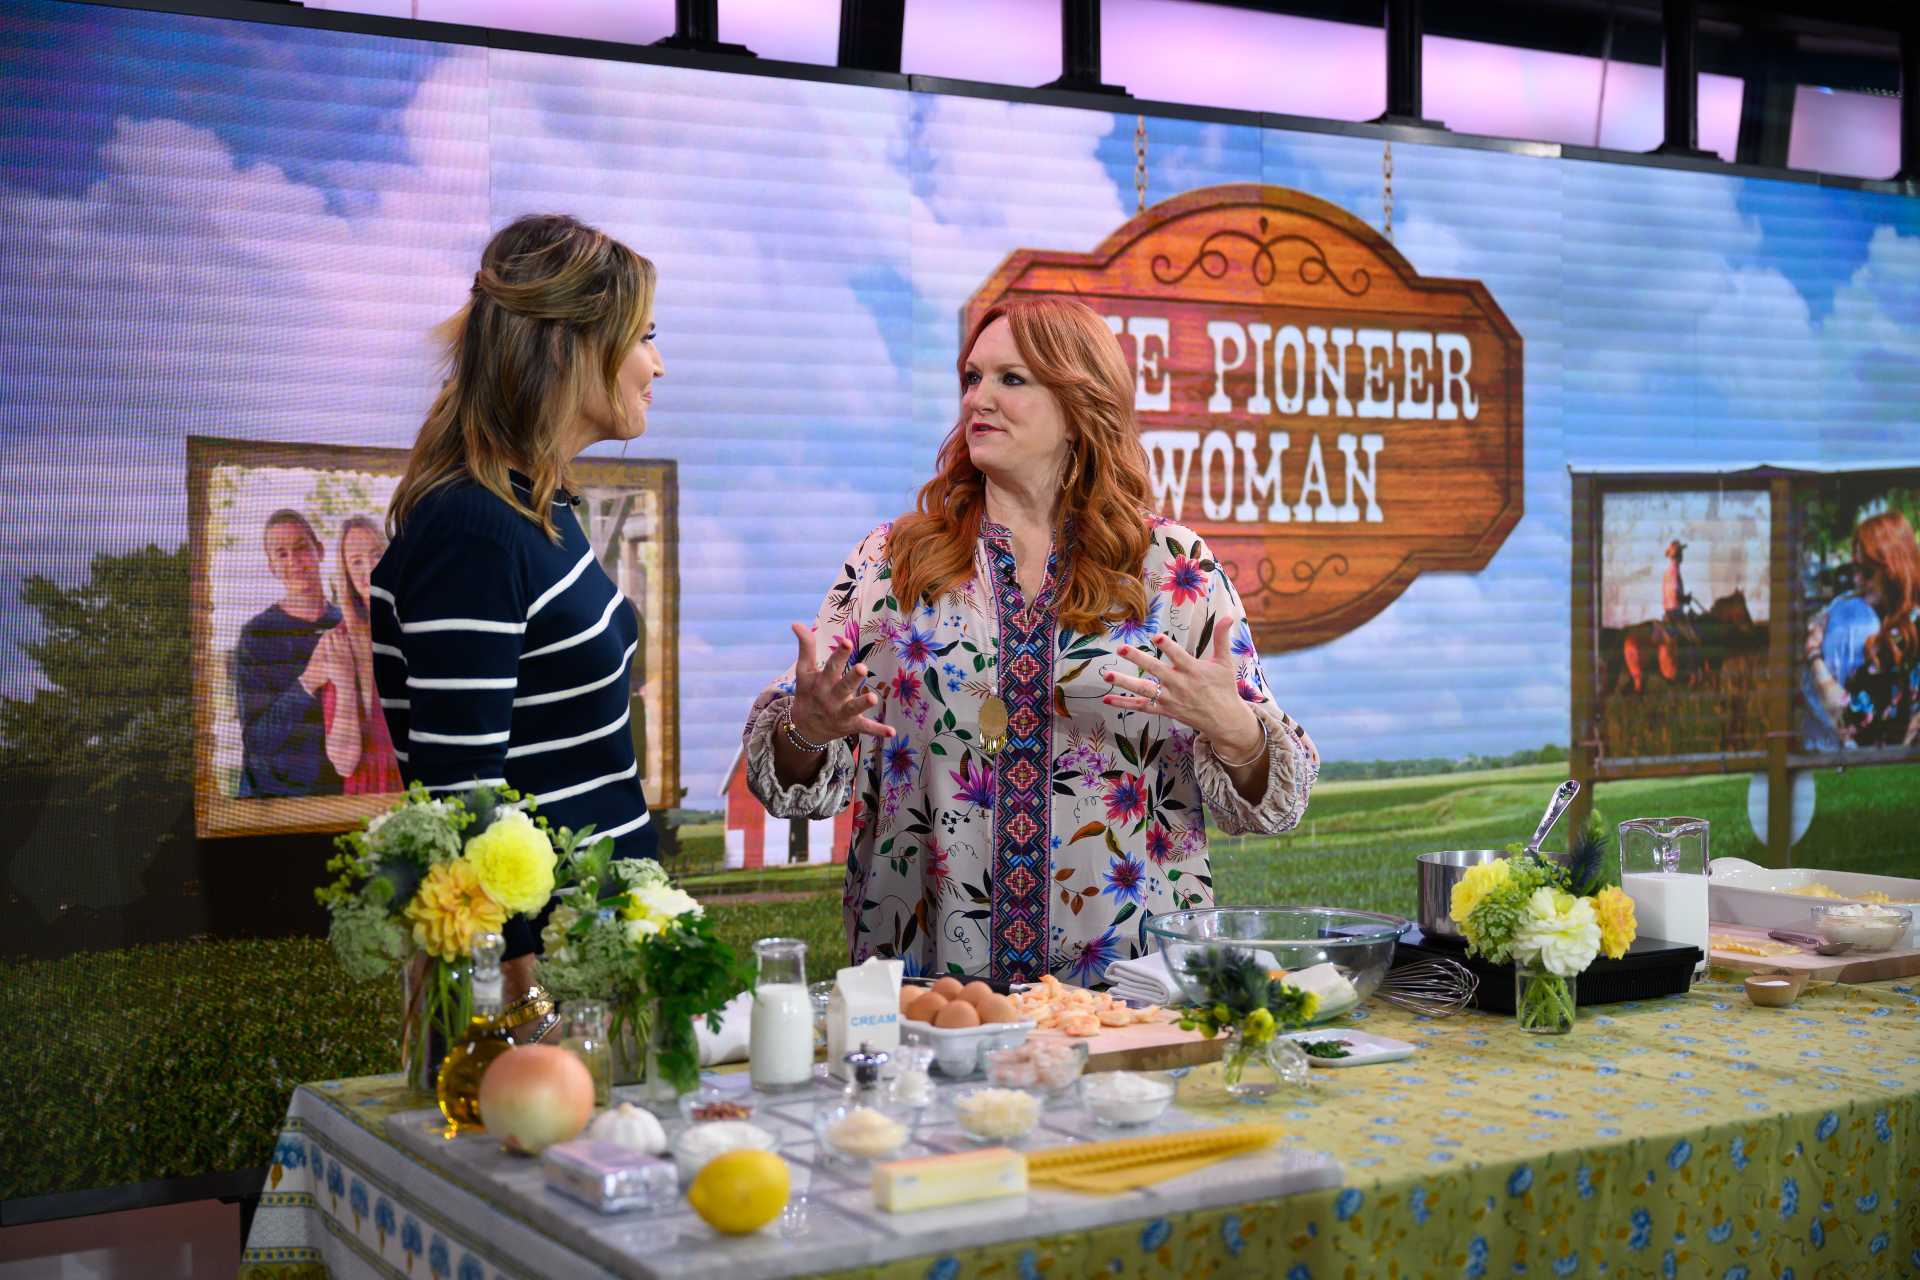 Ree Drummond on the Today Show | Nathan Congleton/NBC/NBCU Photo Bank via Getty Images